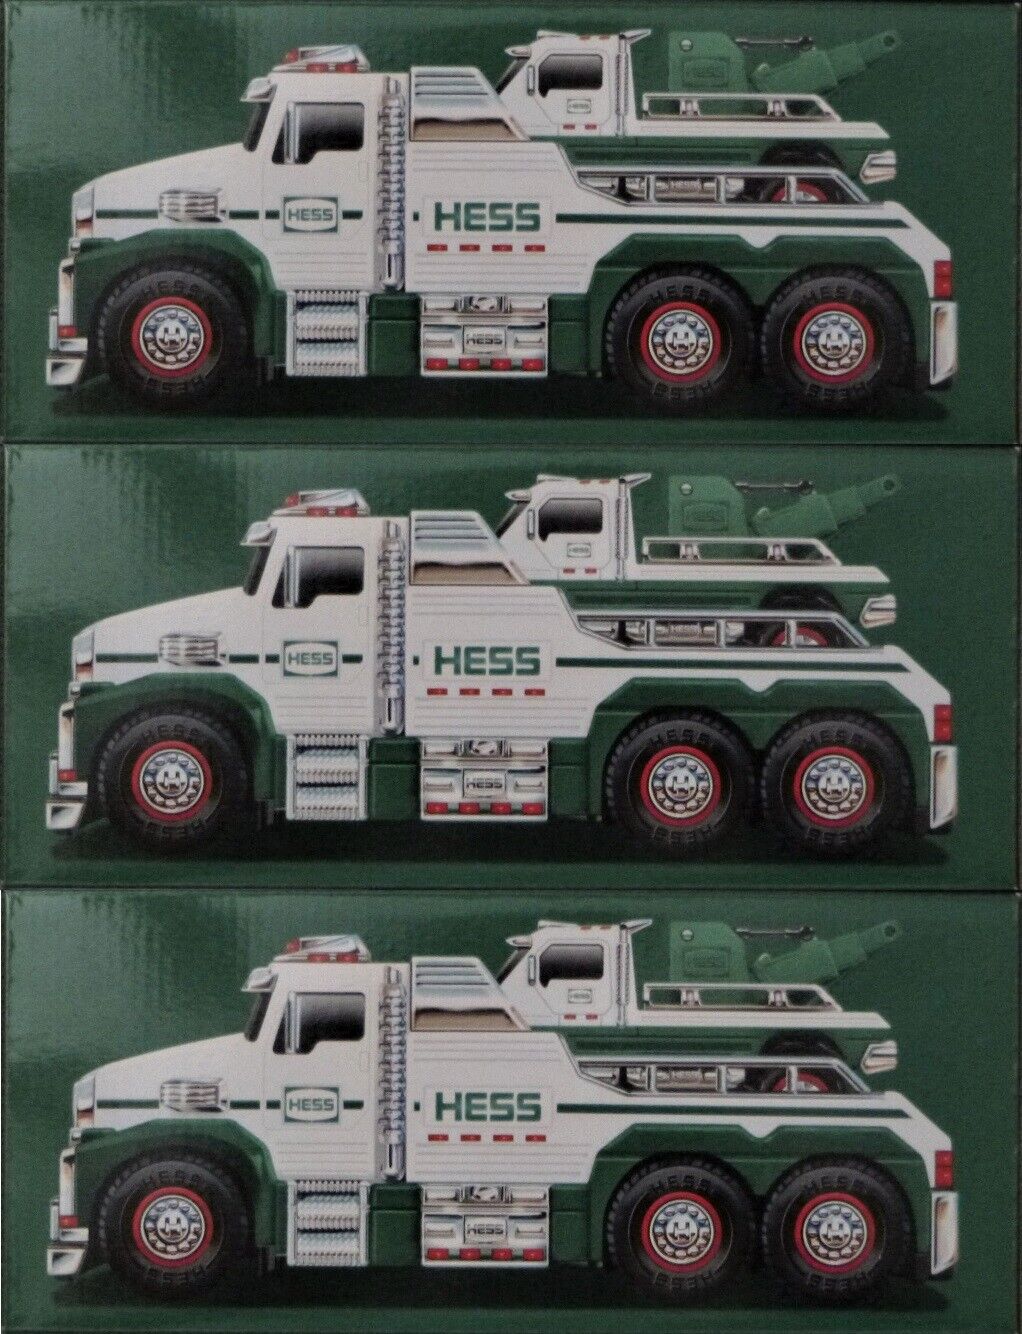 Three Brand New 2019 Hess Toy Tow Truck Rescue Team Trucks In Un-opened Boxes